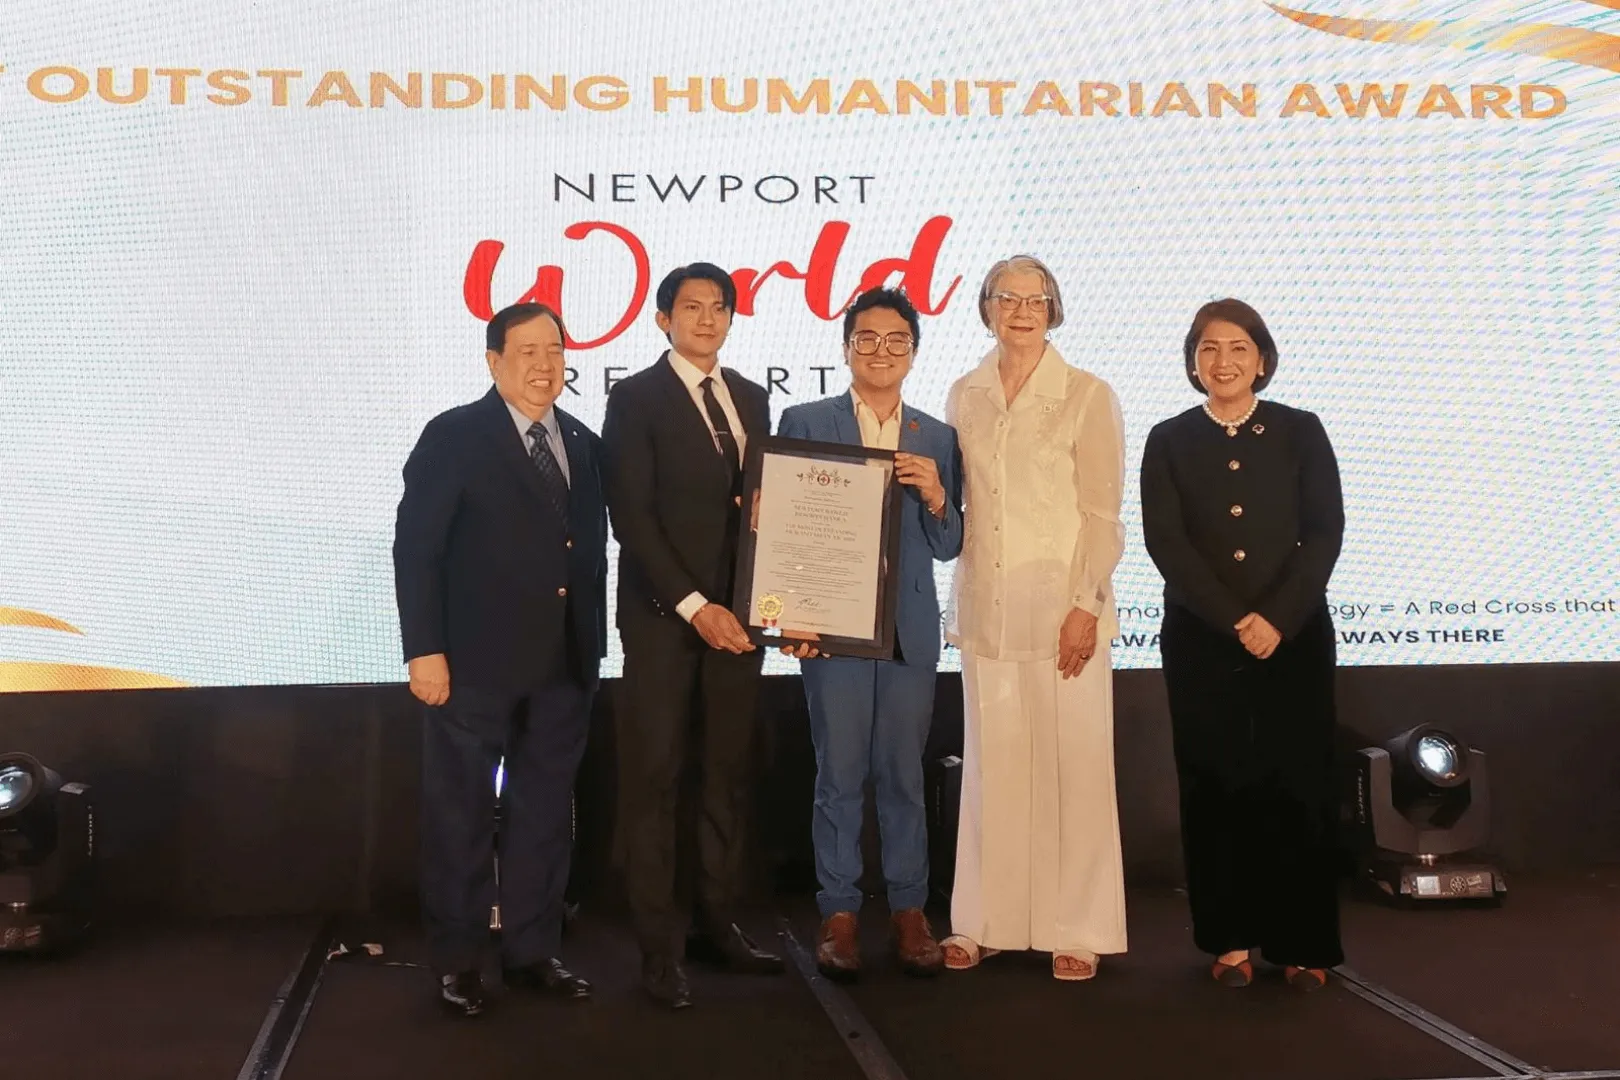  Newport World Resorts earns The Most Outstanding Humanitarian Award from Philippine Red Cross